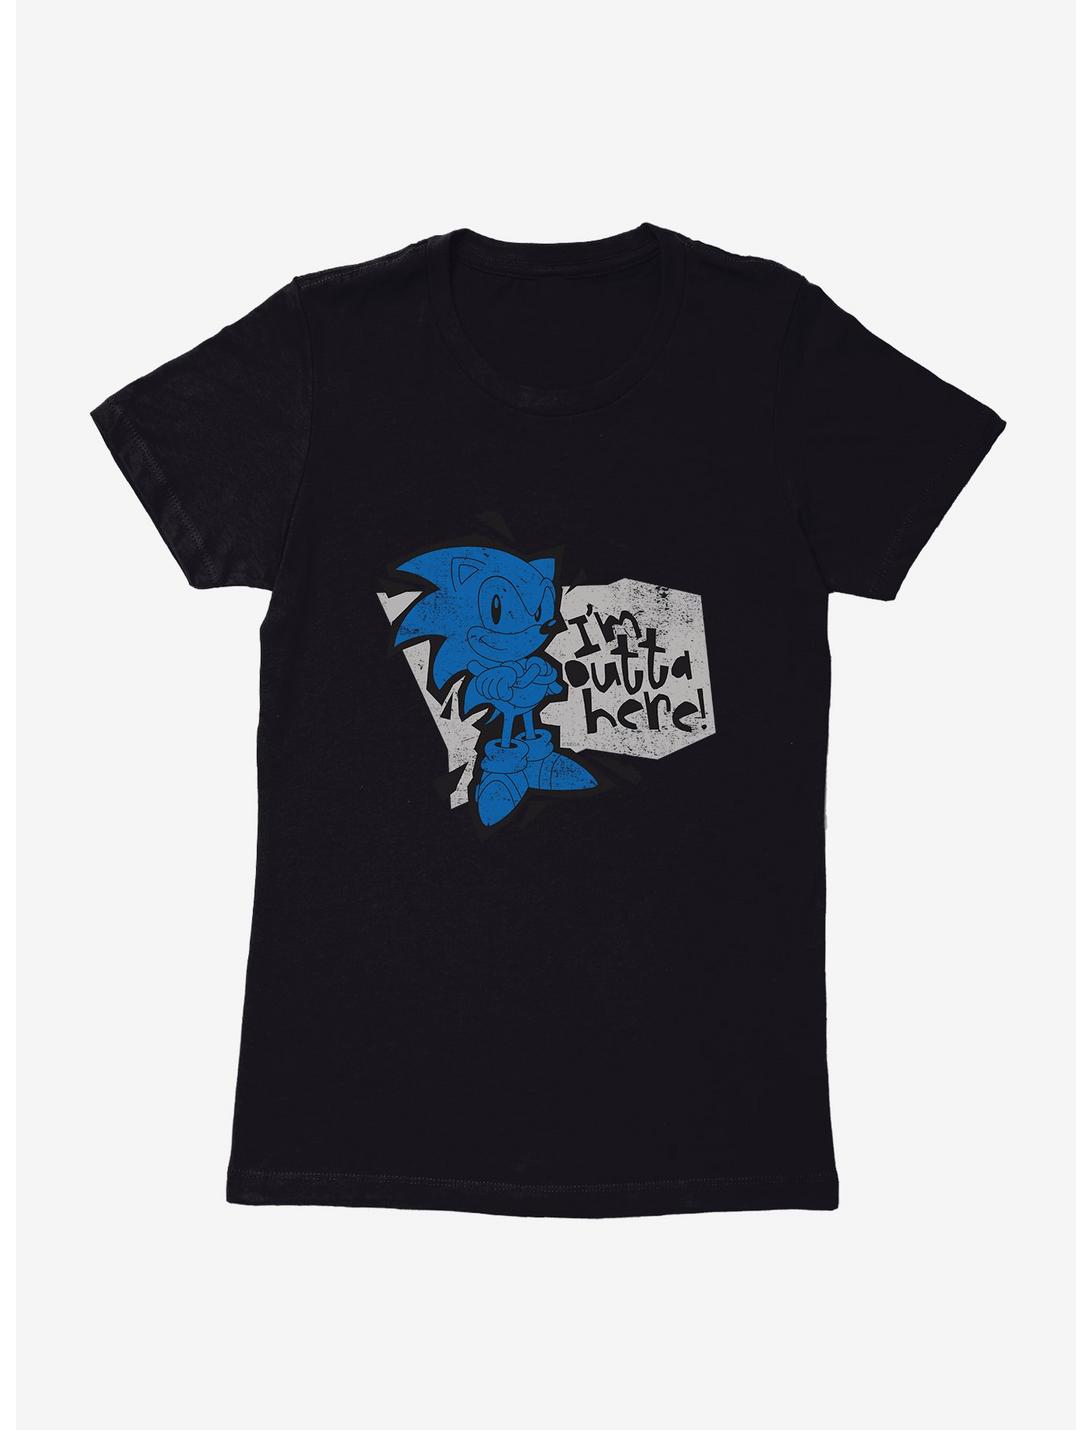 Sonic The Hedgehog I'm Outta Here! Distressed Womens T-Shirt, BLACK, hi-res